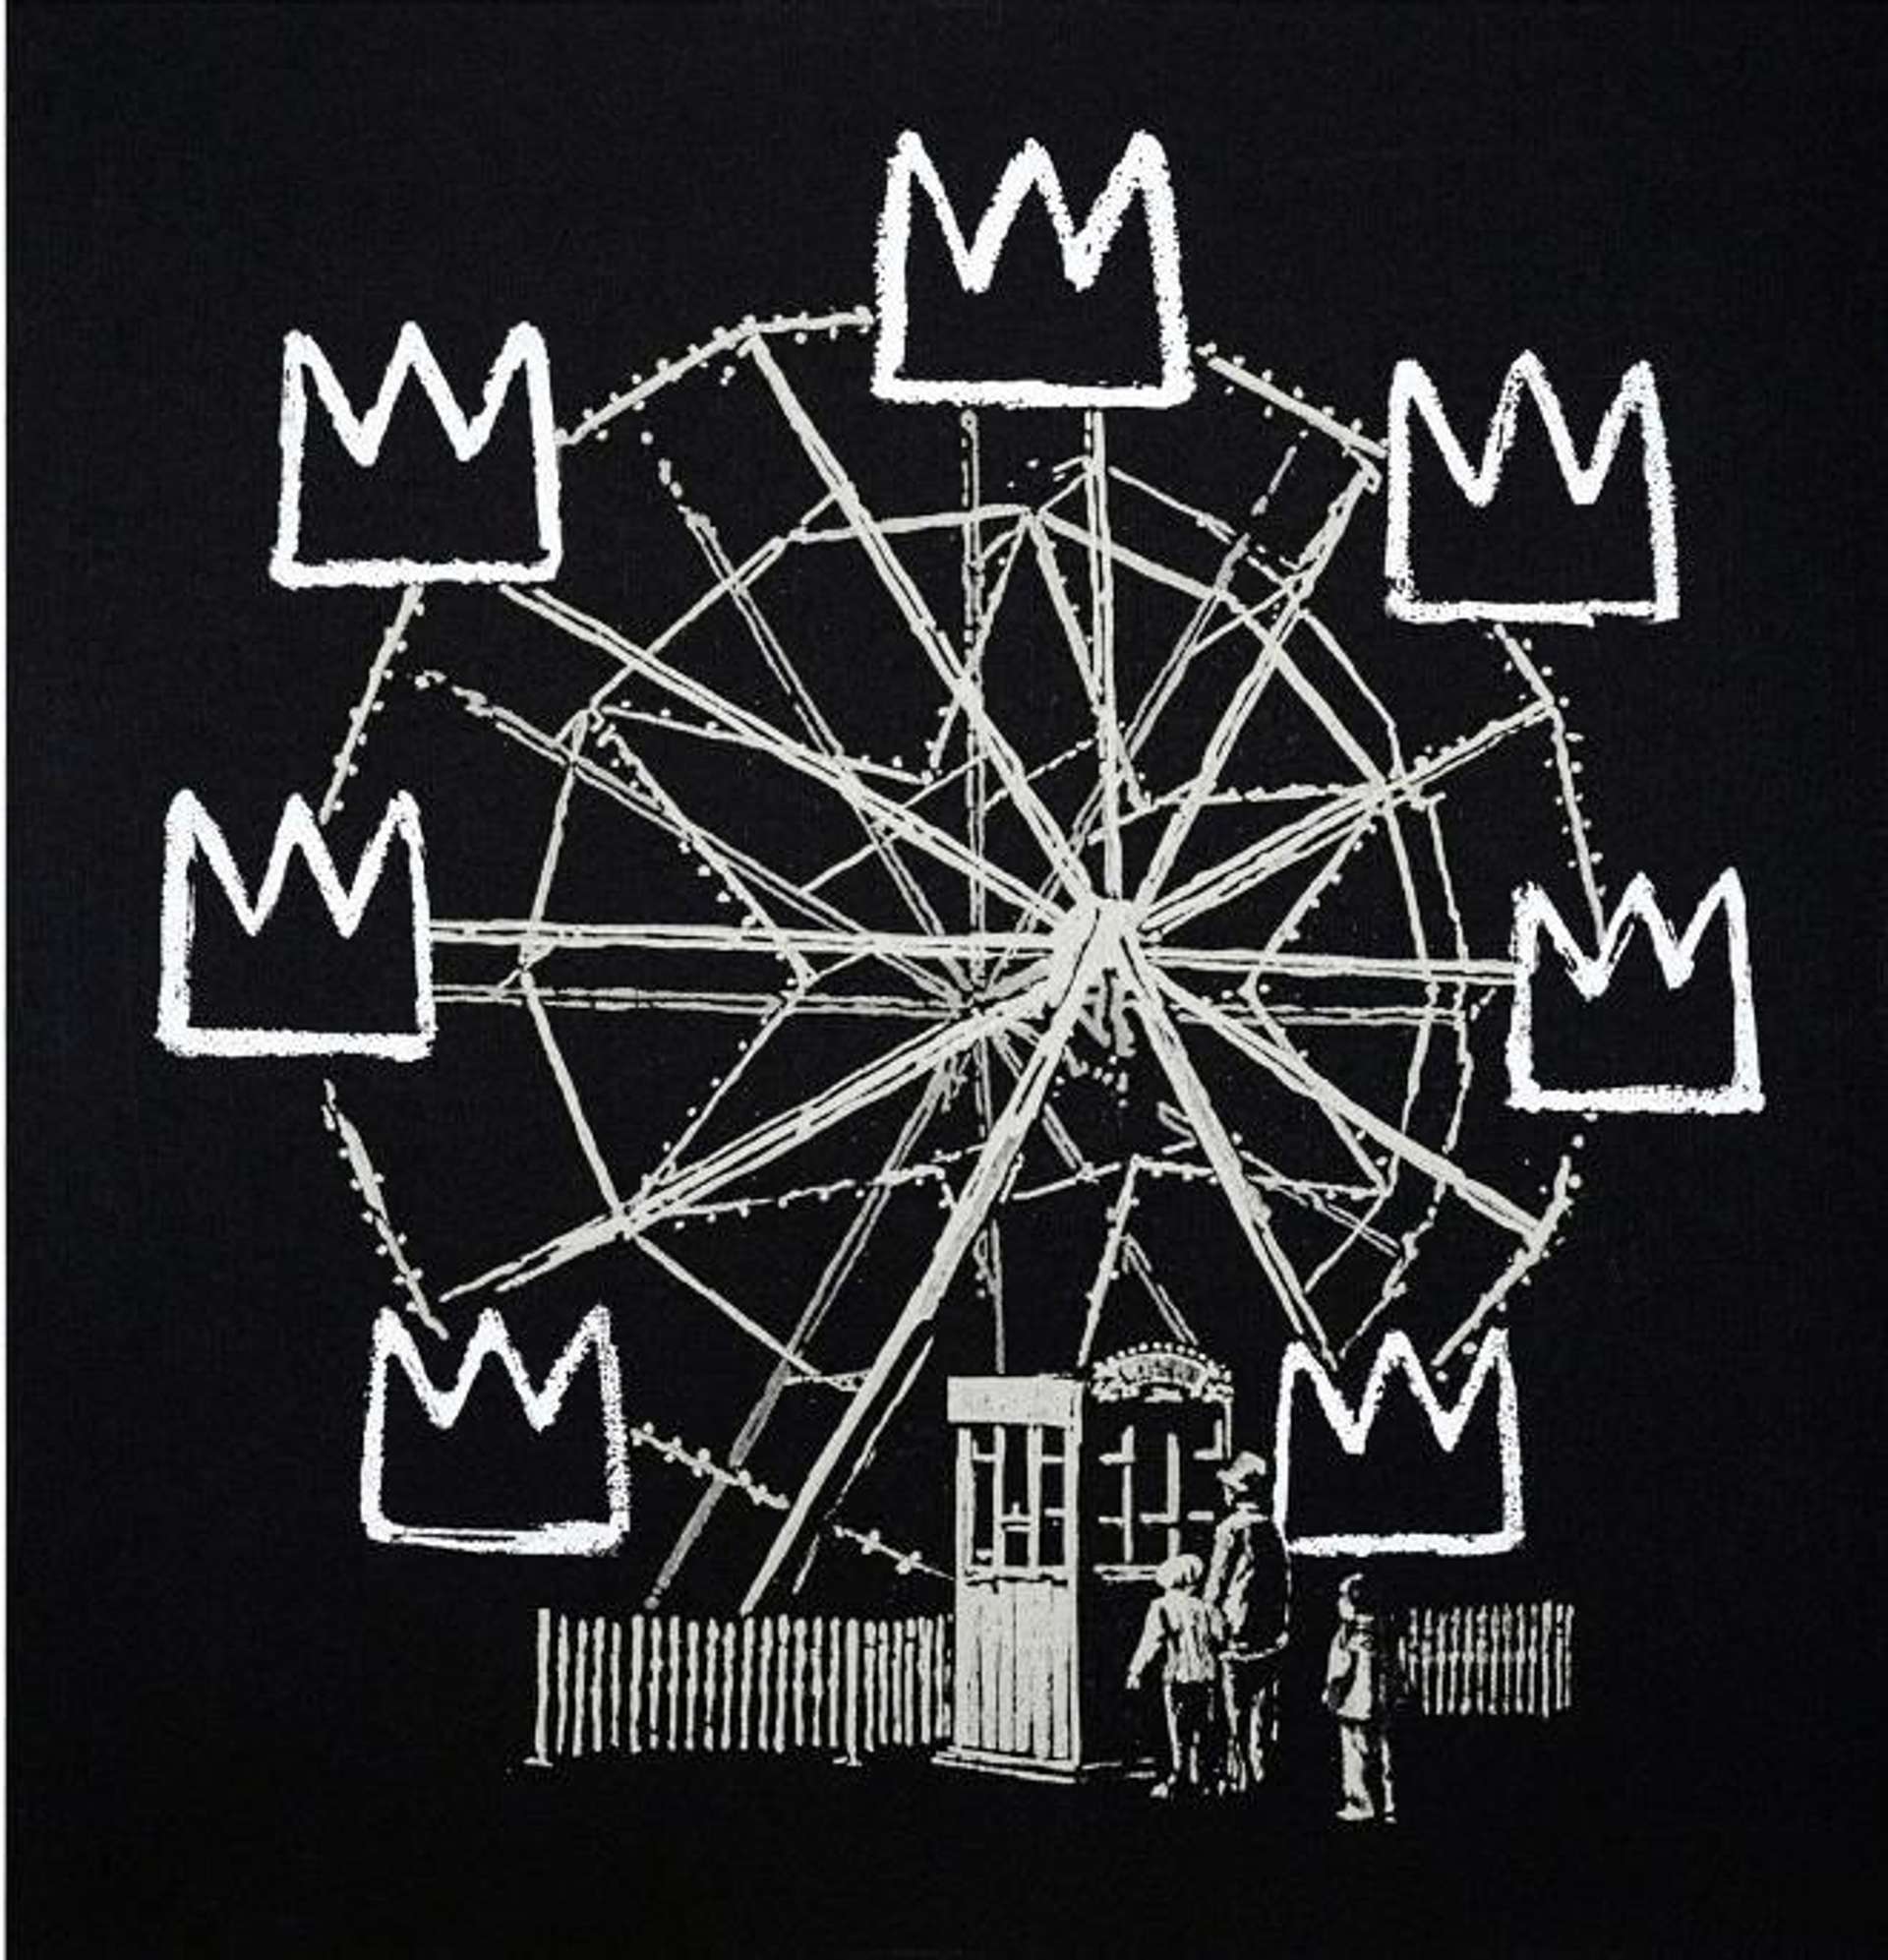 Banksy's 2019 print Banksquiat (black). The image depicts a ferris wheel, with crowns replacing carts in homage to Jean-Michel Basquiat.